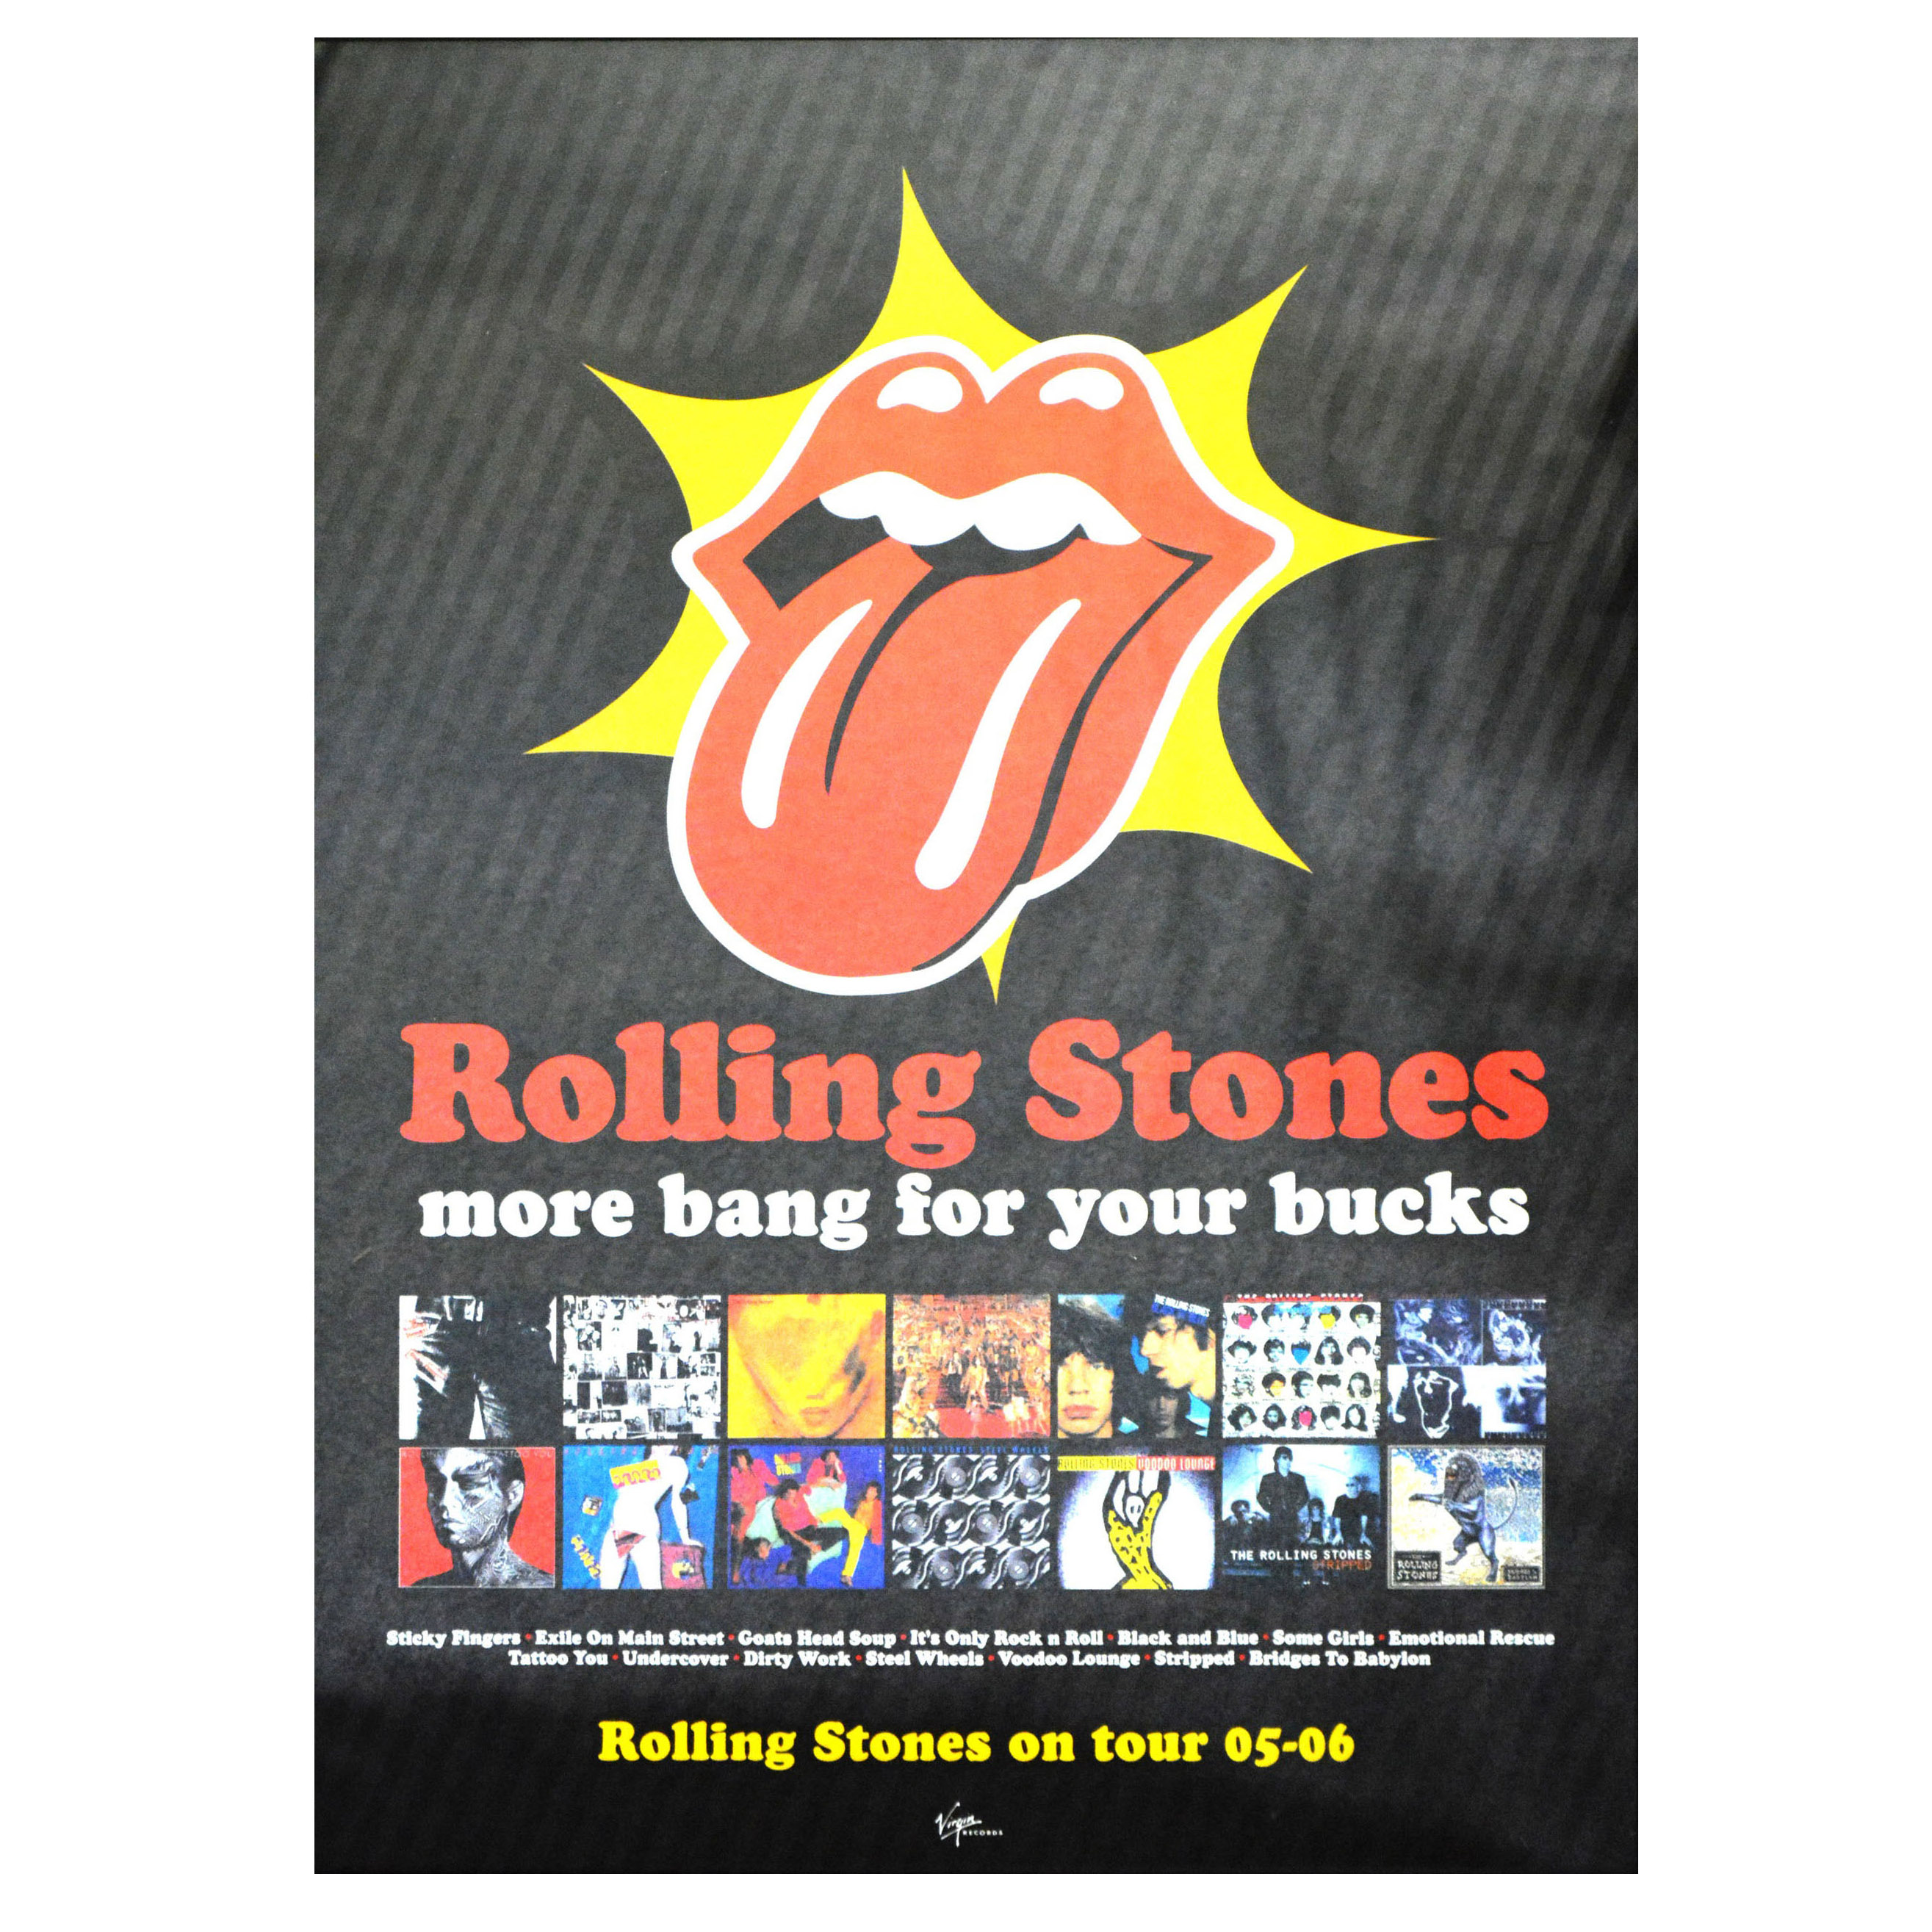 Rolling Stones More Bang for you Buck Poster